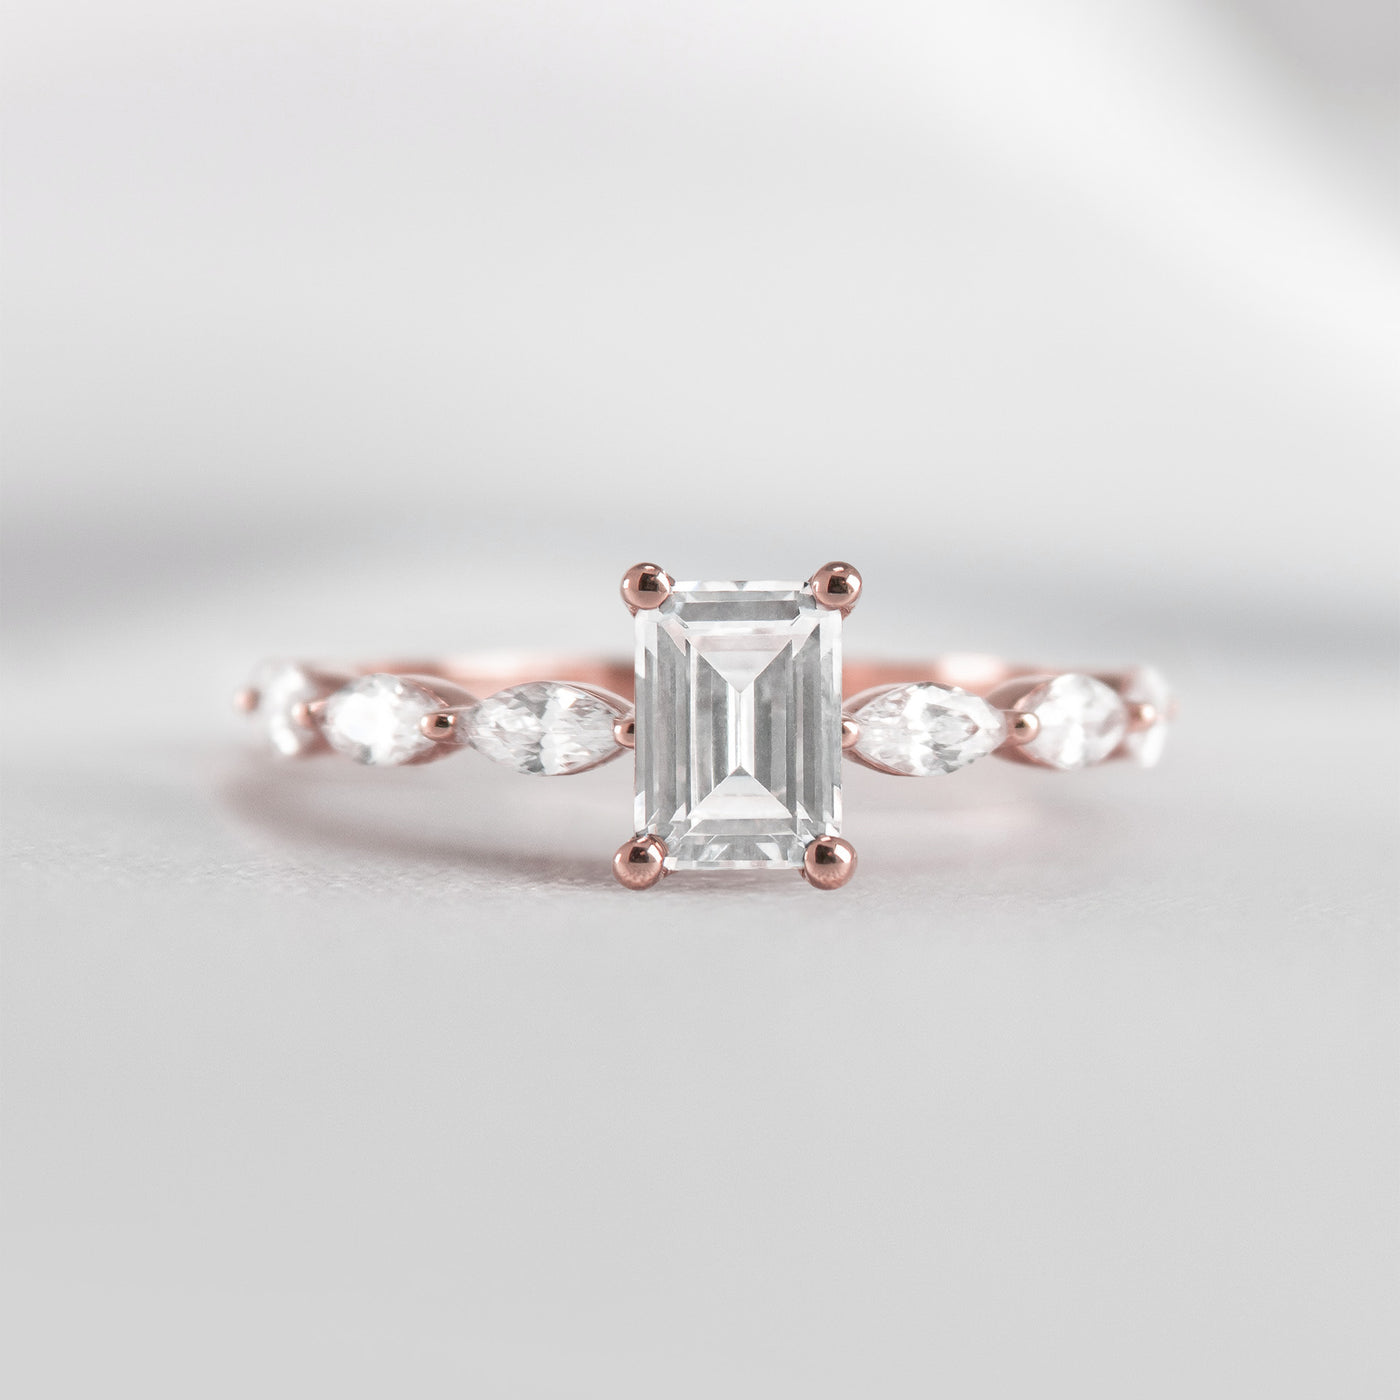 Shown in 1.0 Carat * The Riley Marquise Stone Diamond Engagement Ring | Lisa Robin#shape_emerald